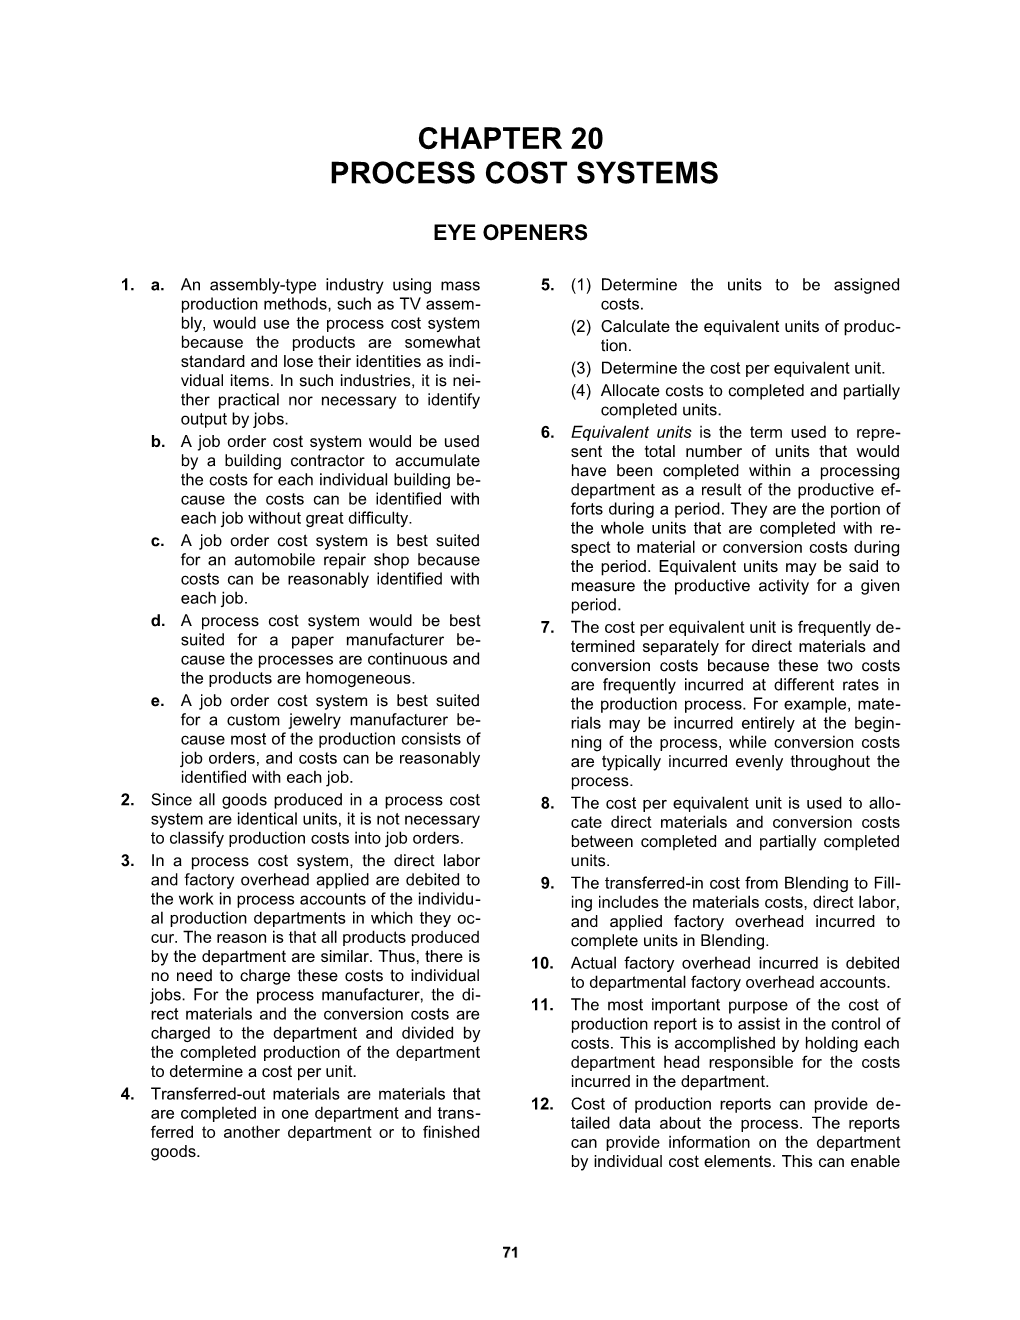 CHAPTER 20Process Cost Systems